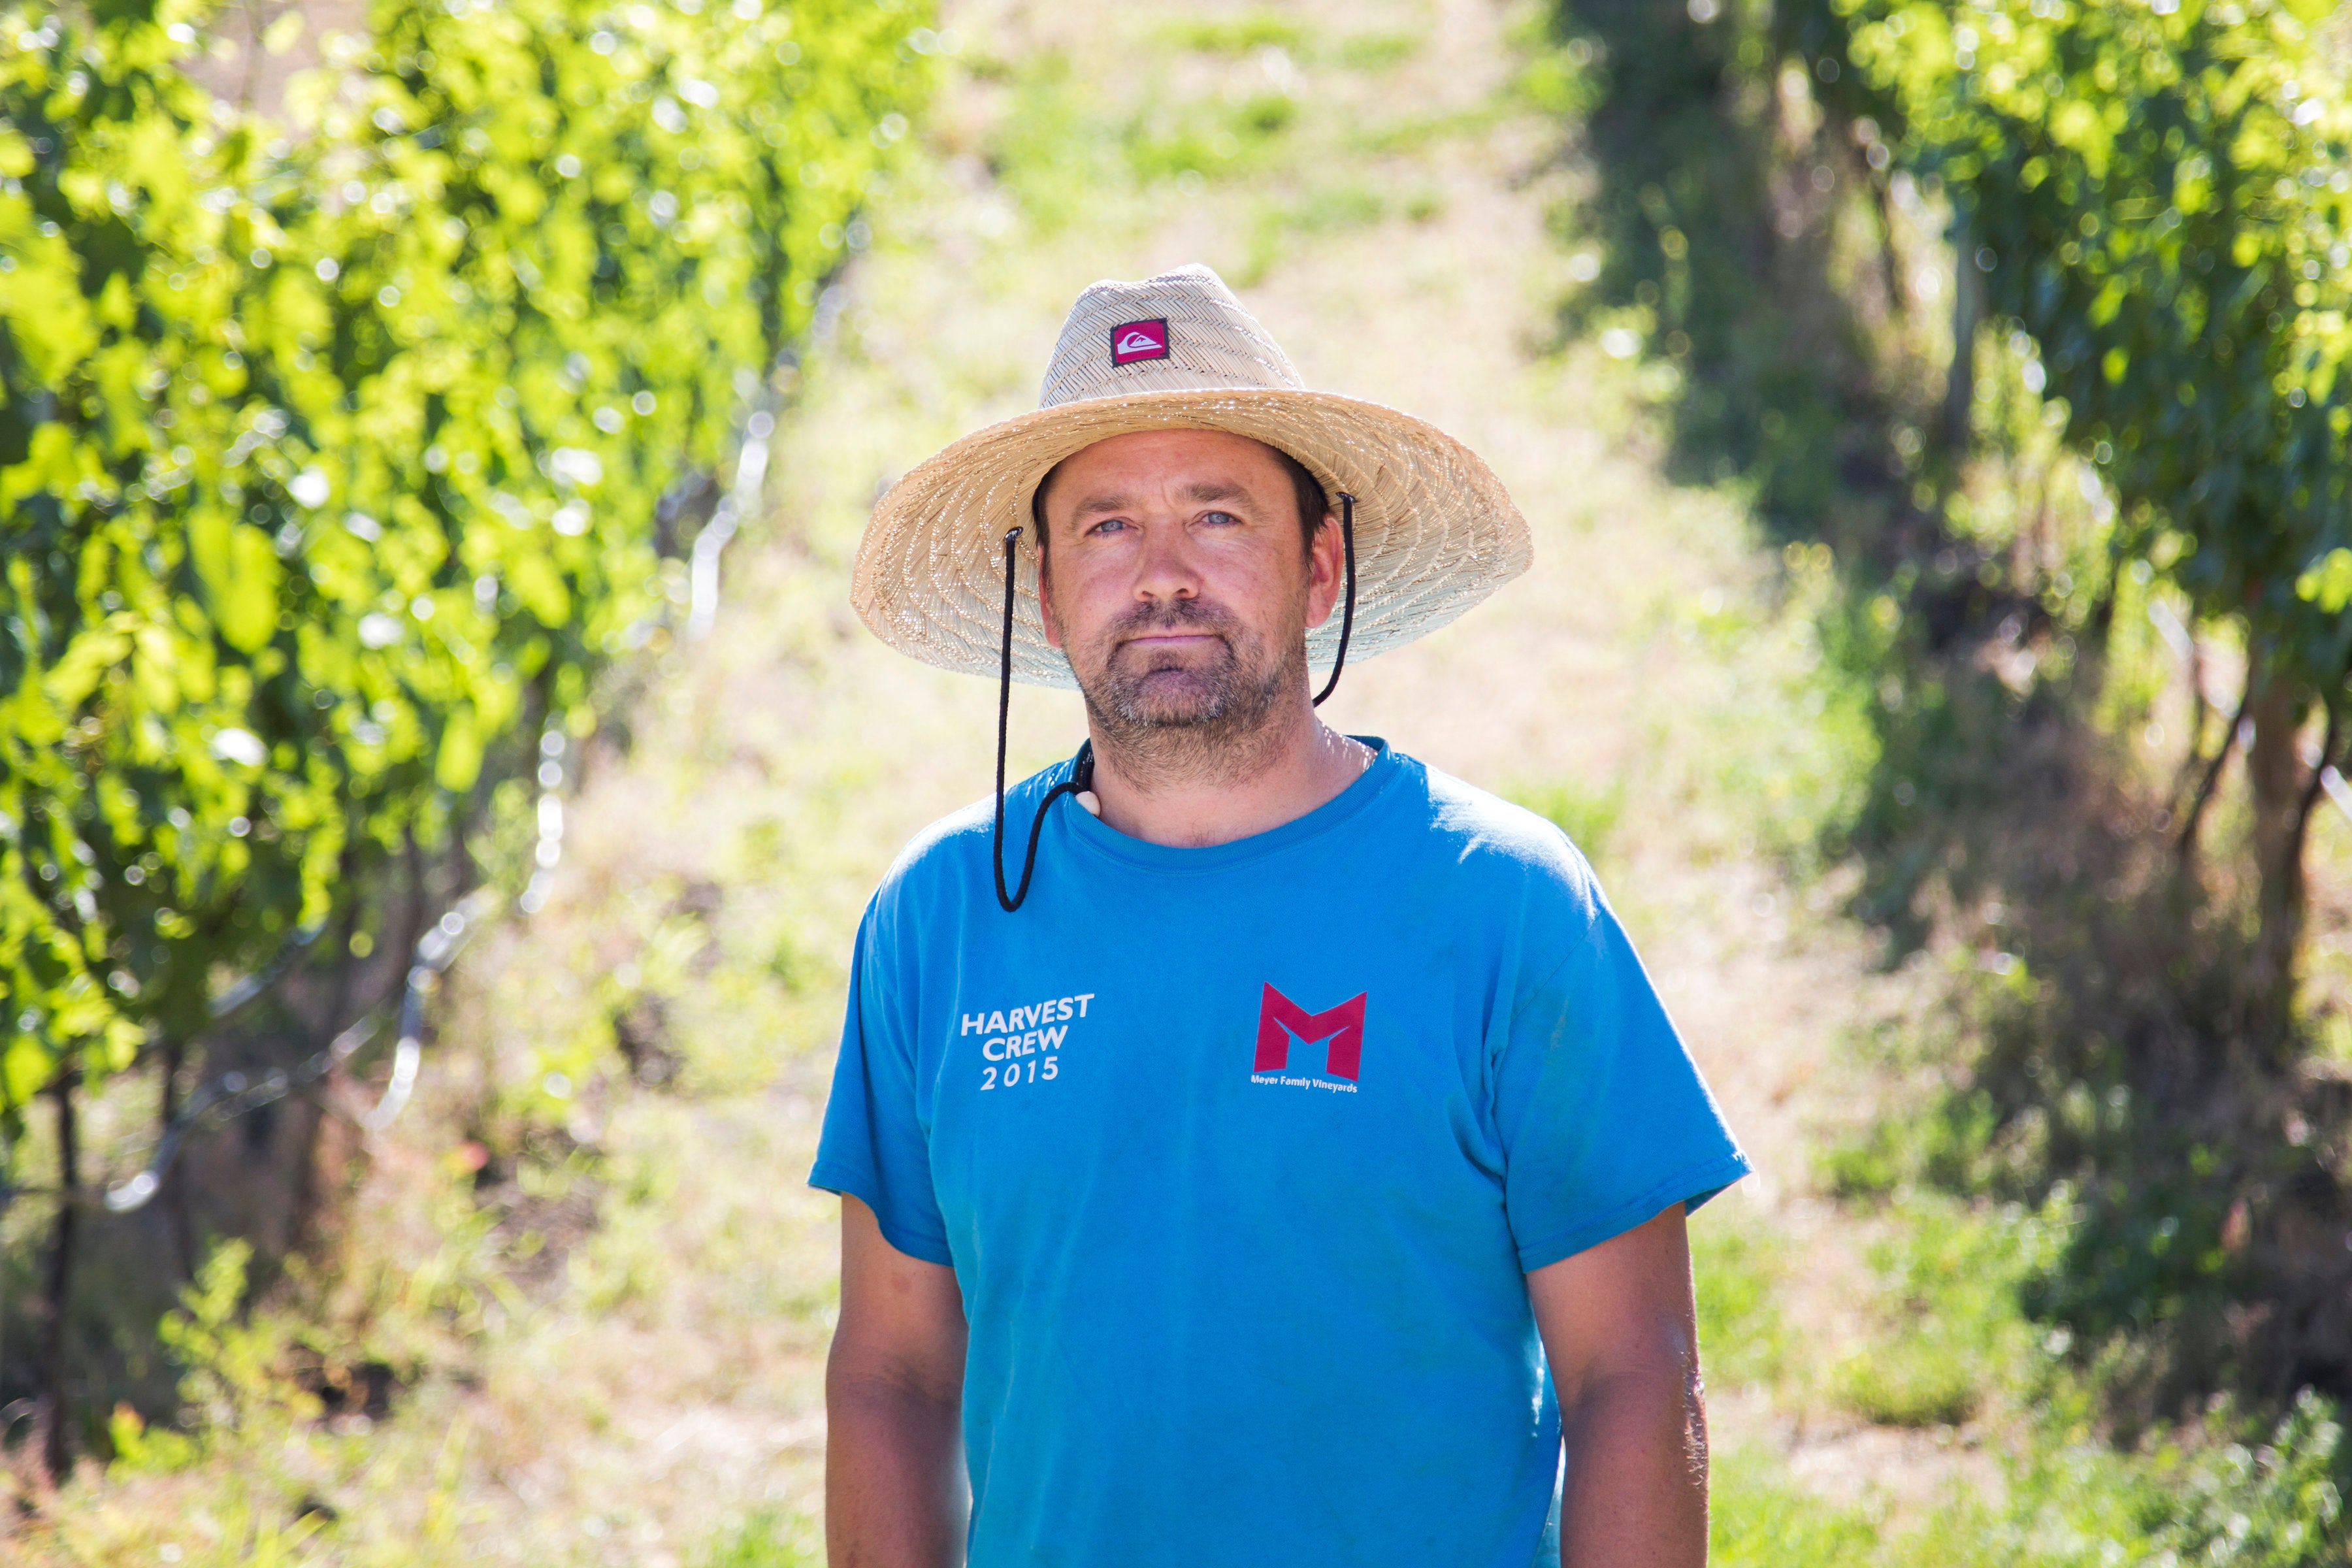 Chris Carson, Winemaker and Viticulturist